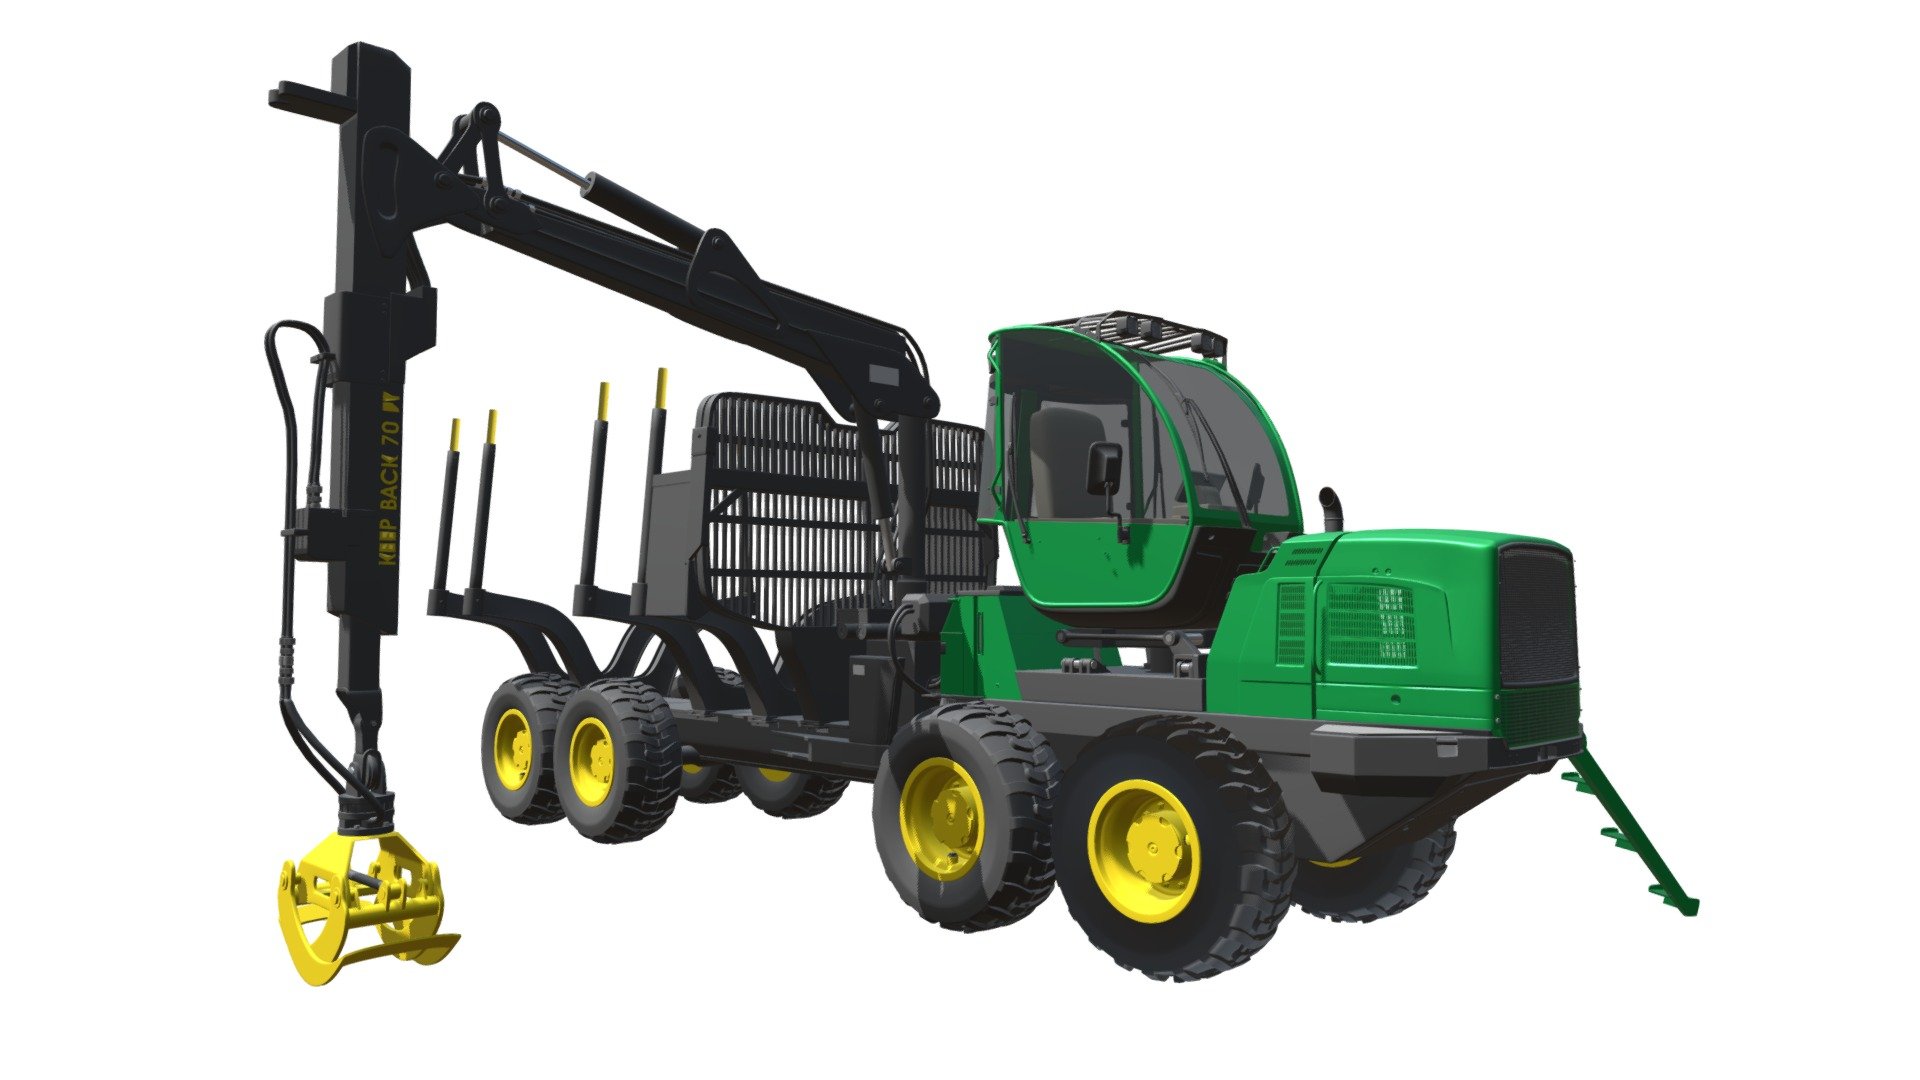 Quality 3d model of forwarder forestry vehicle 3d model